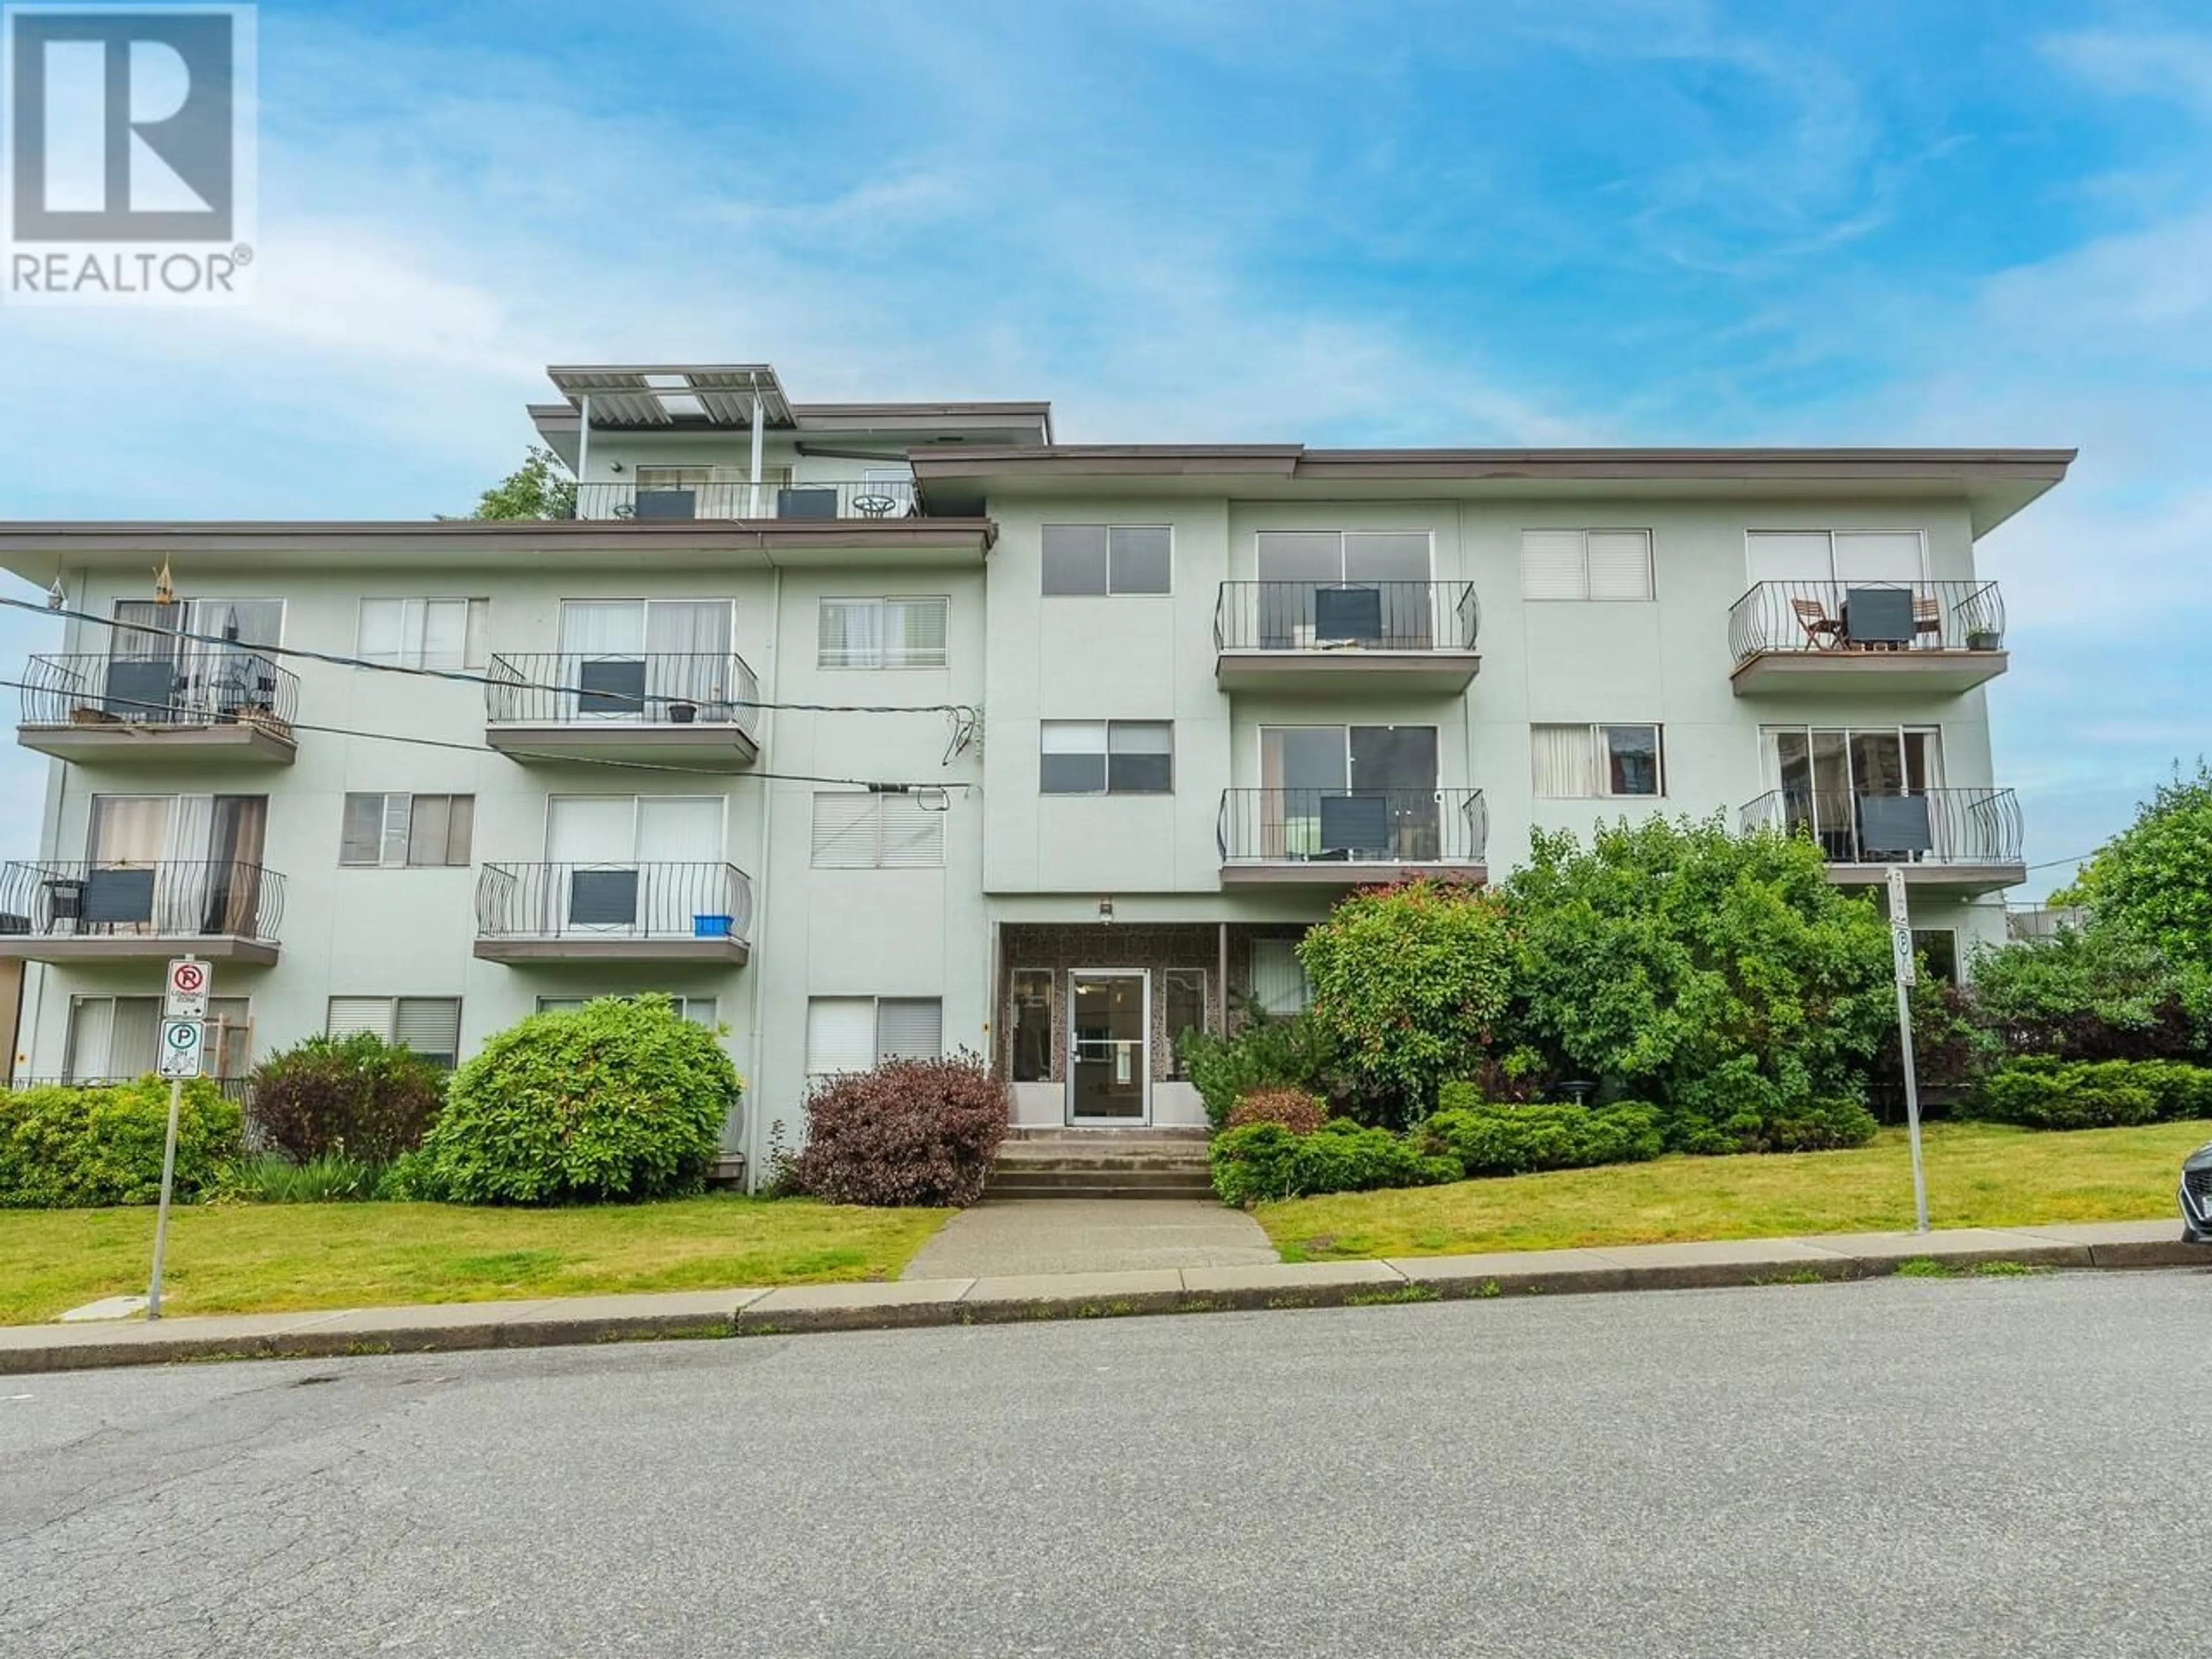 A pic from exterior of the house or condo for 314 611 BLACKFORD STREET, New Westminster British Columbia V3M1R7